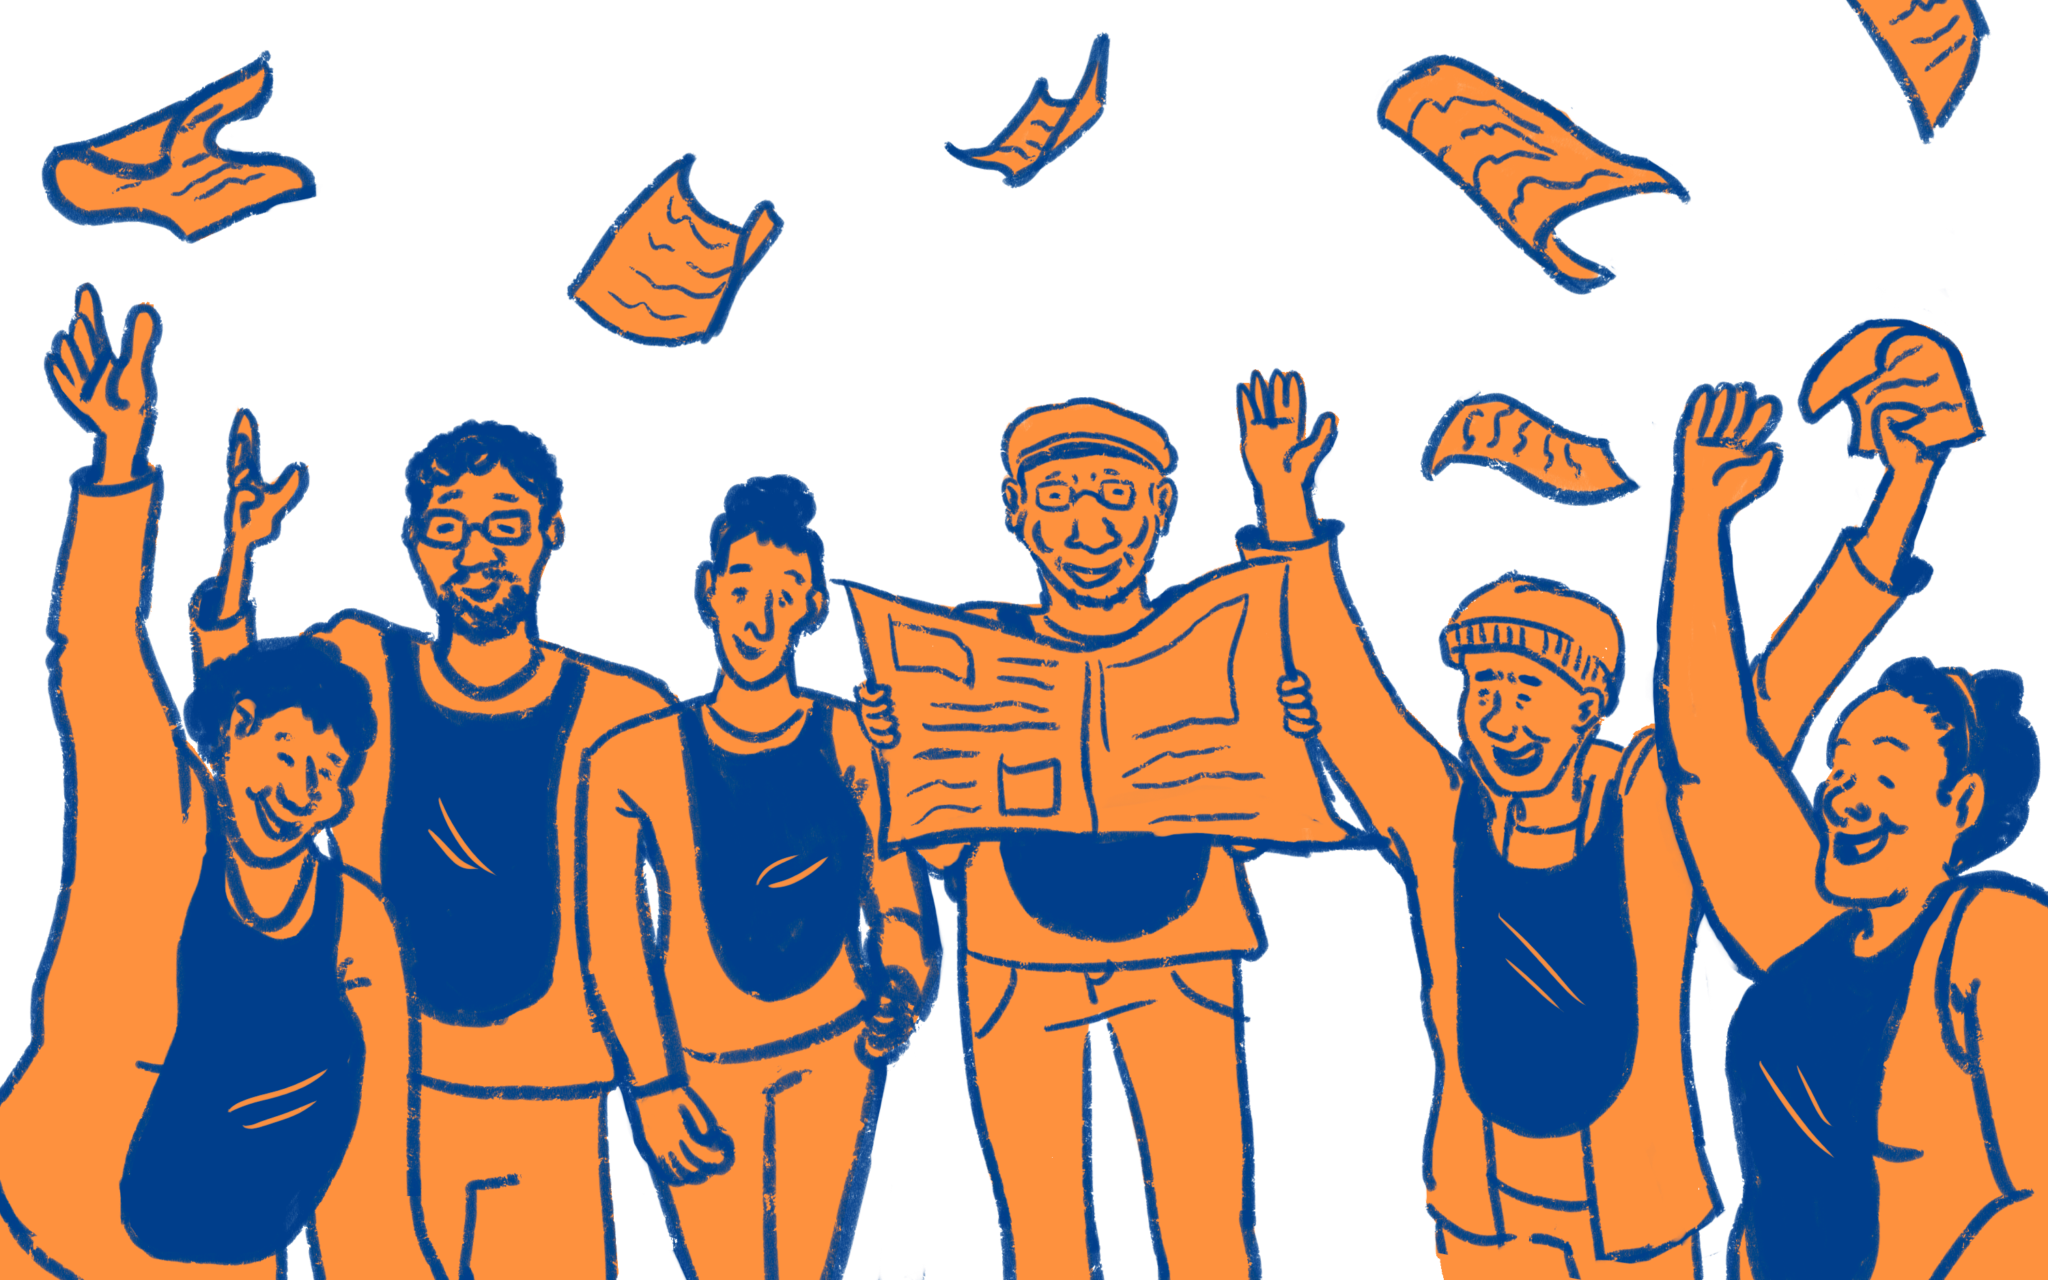 Digital illustration of Street Sense Media vendors wearing vests and celebrating by tossing newspapers into the air.